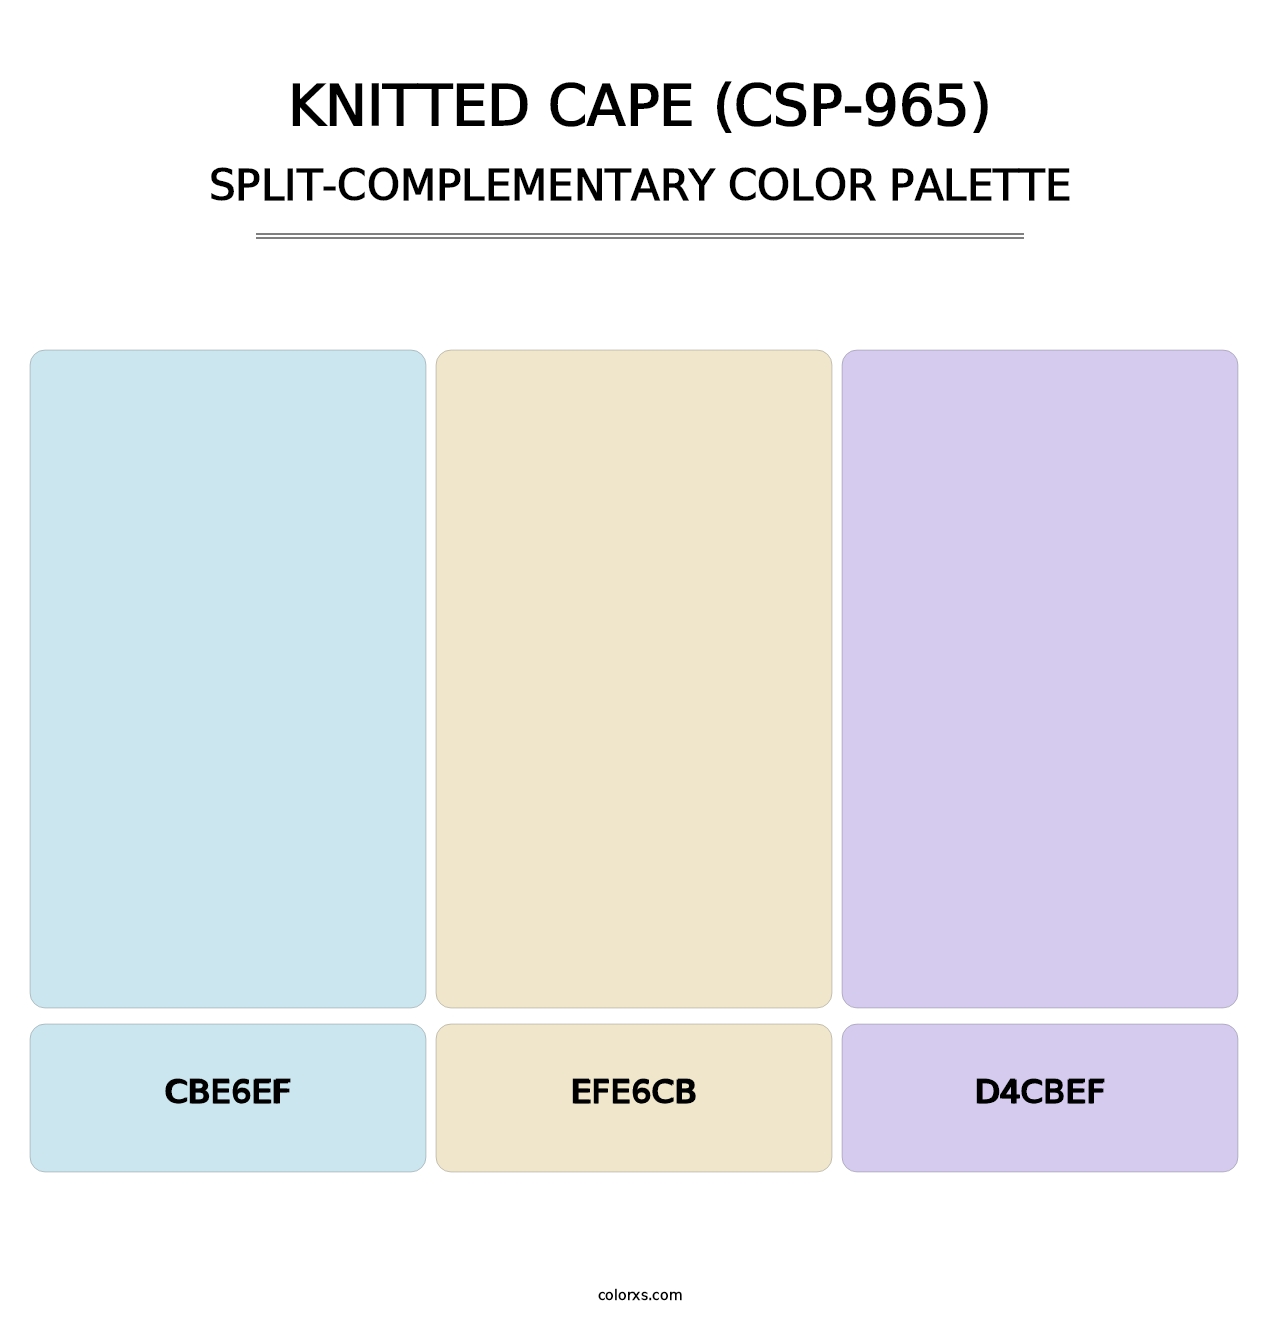 Knitted Cape (CSP-965) - Split-Complementary Color Palette